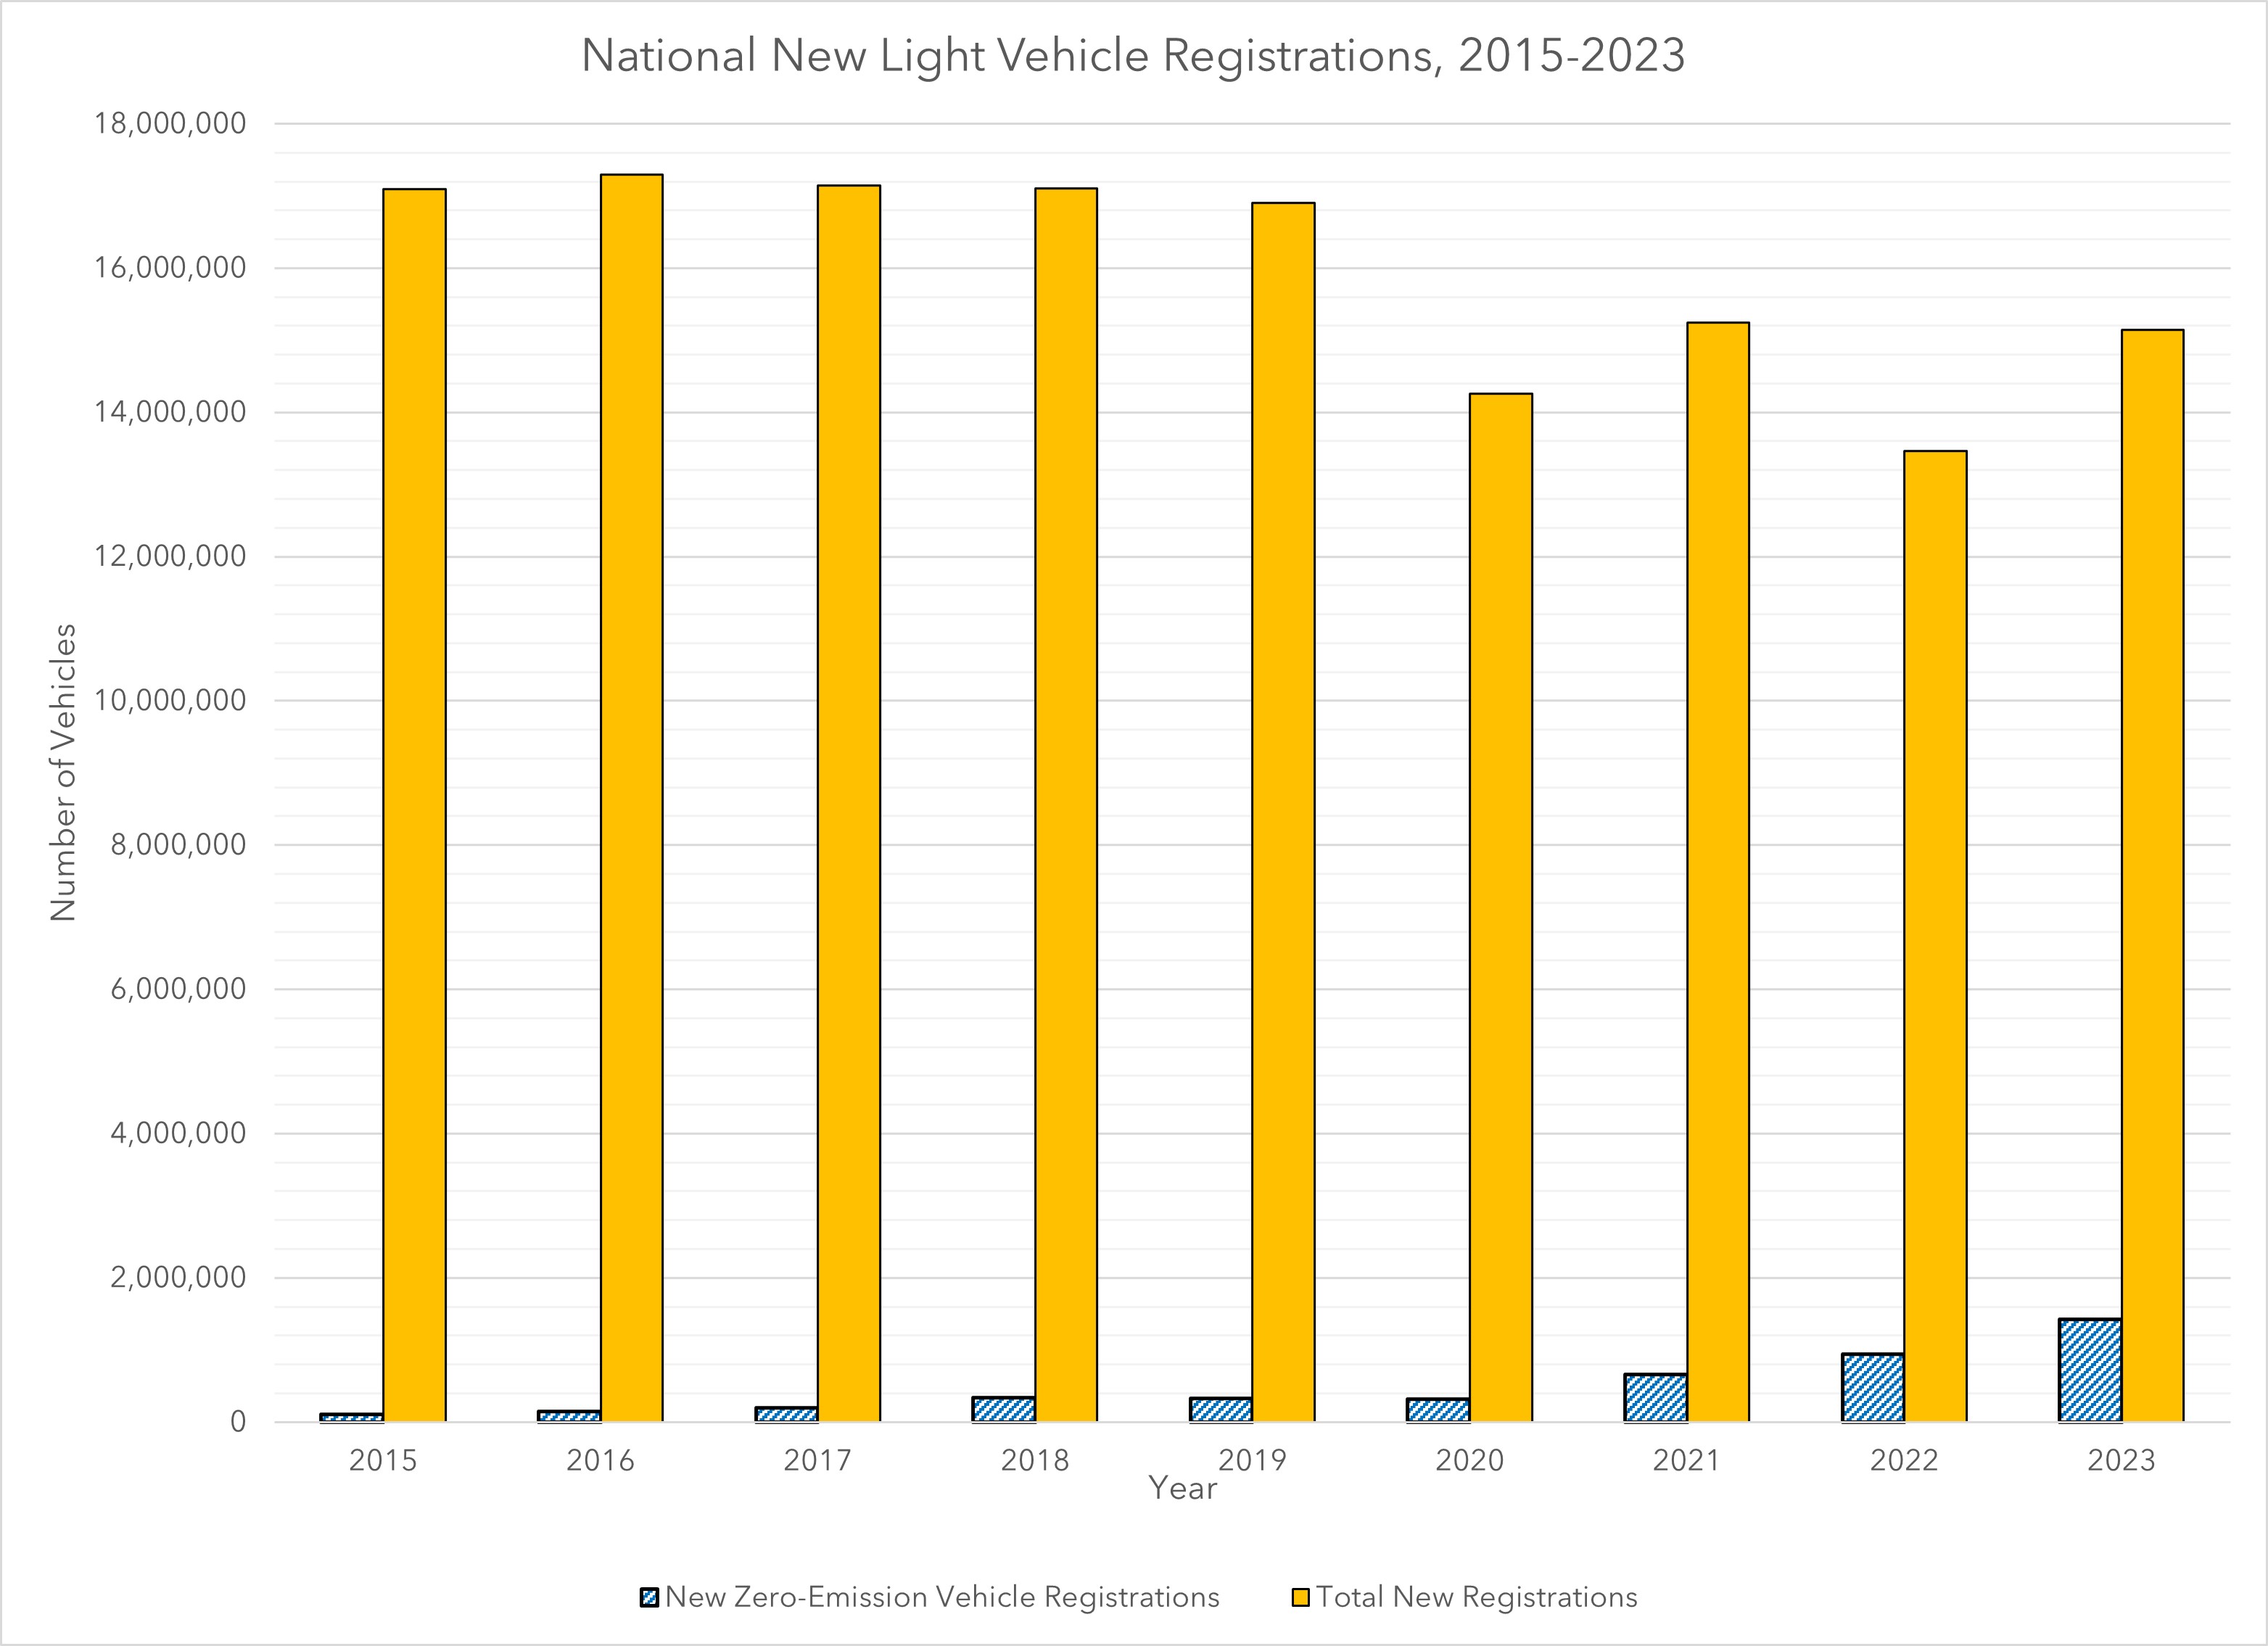 This visual displays national annual light-duty new vehicle registrations from 2015 through 2023. It compares new zero-emission vehicle registrations against total new registrations.